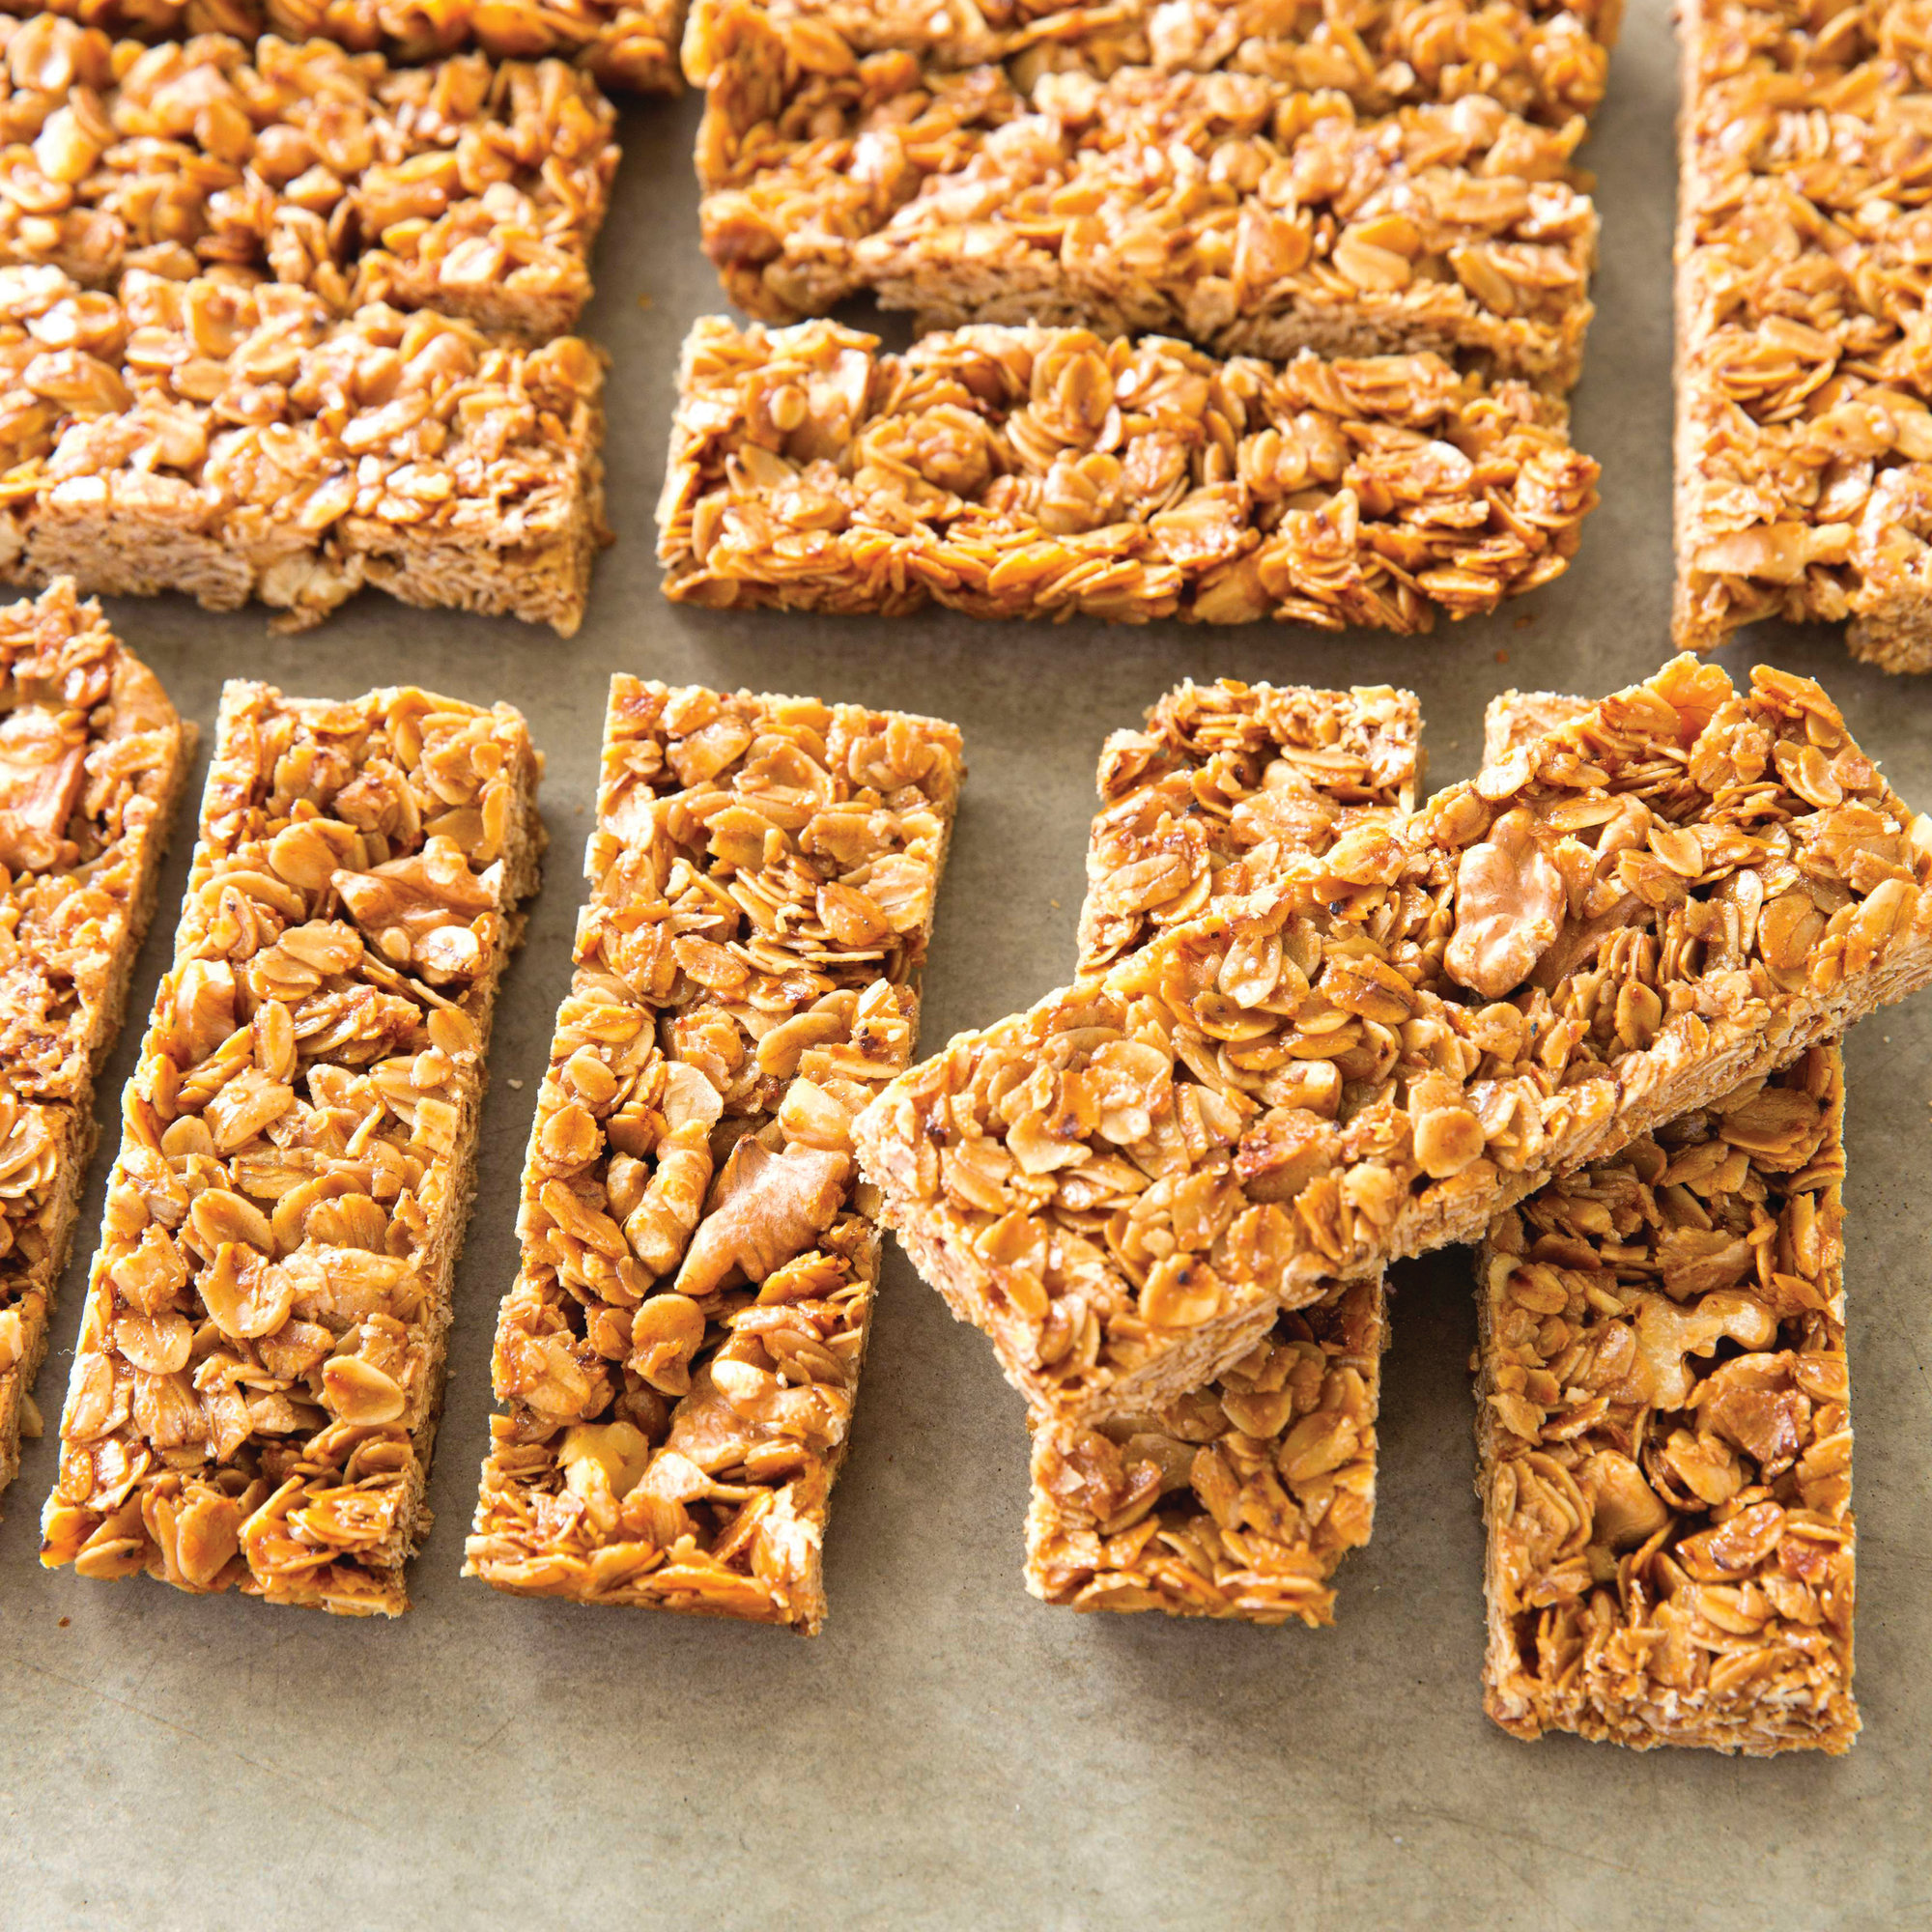 Honey keeps these granola bars together | The Sumter Item